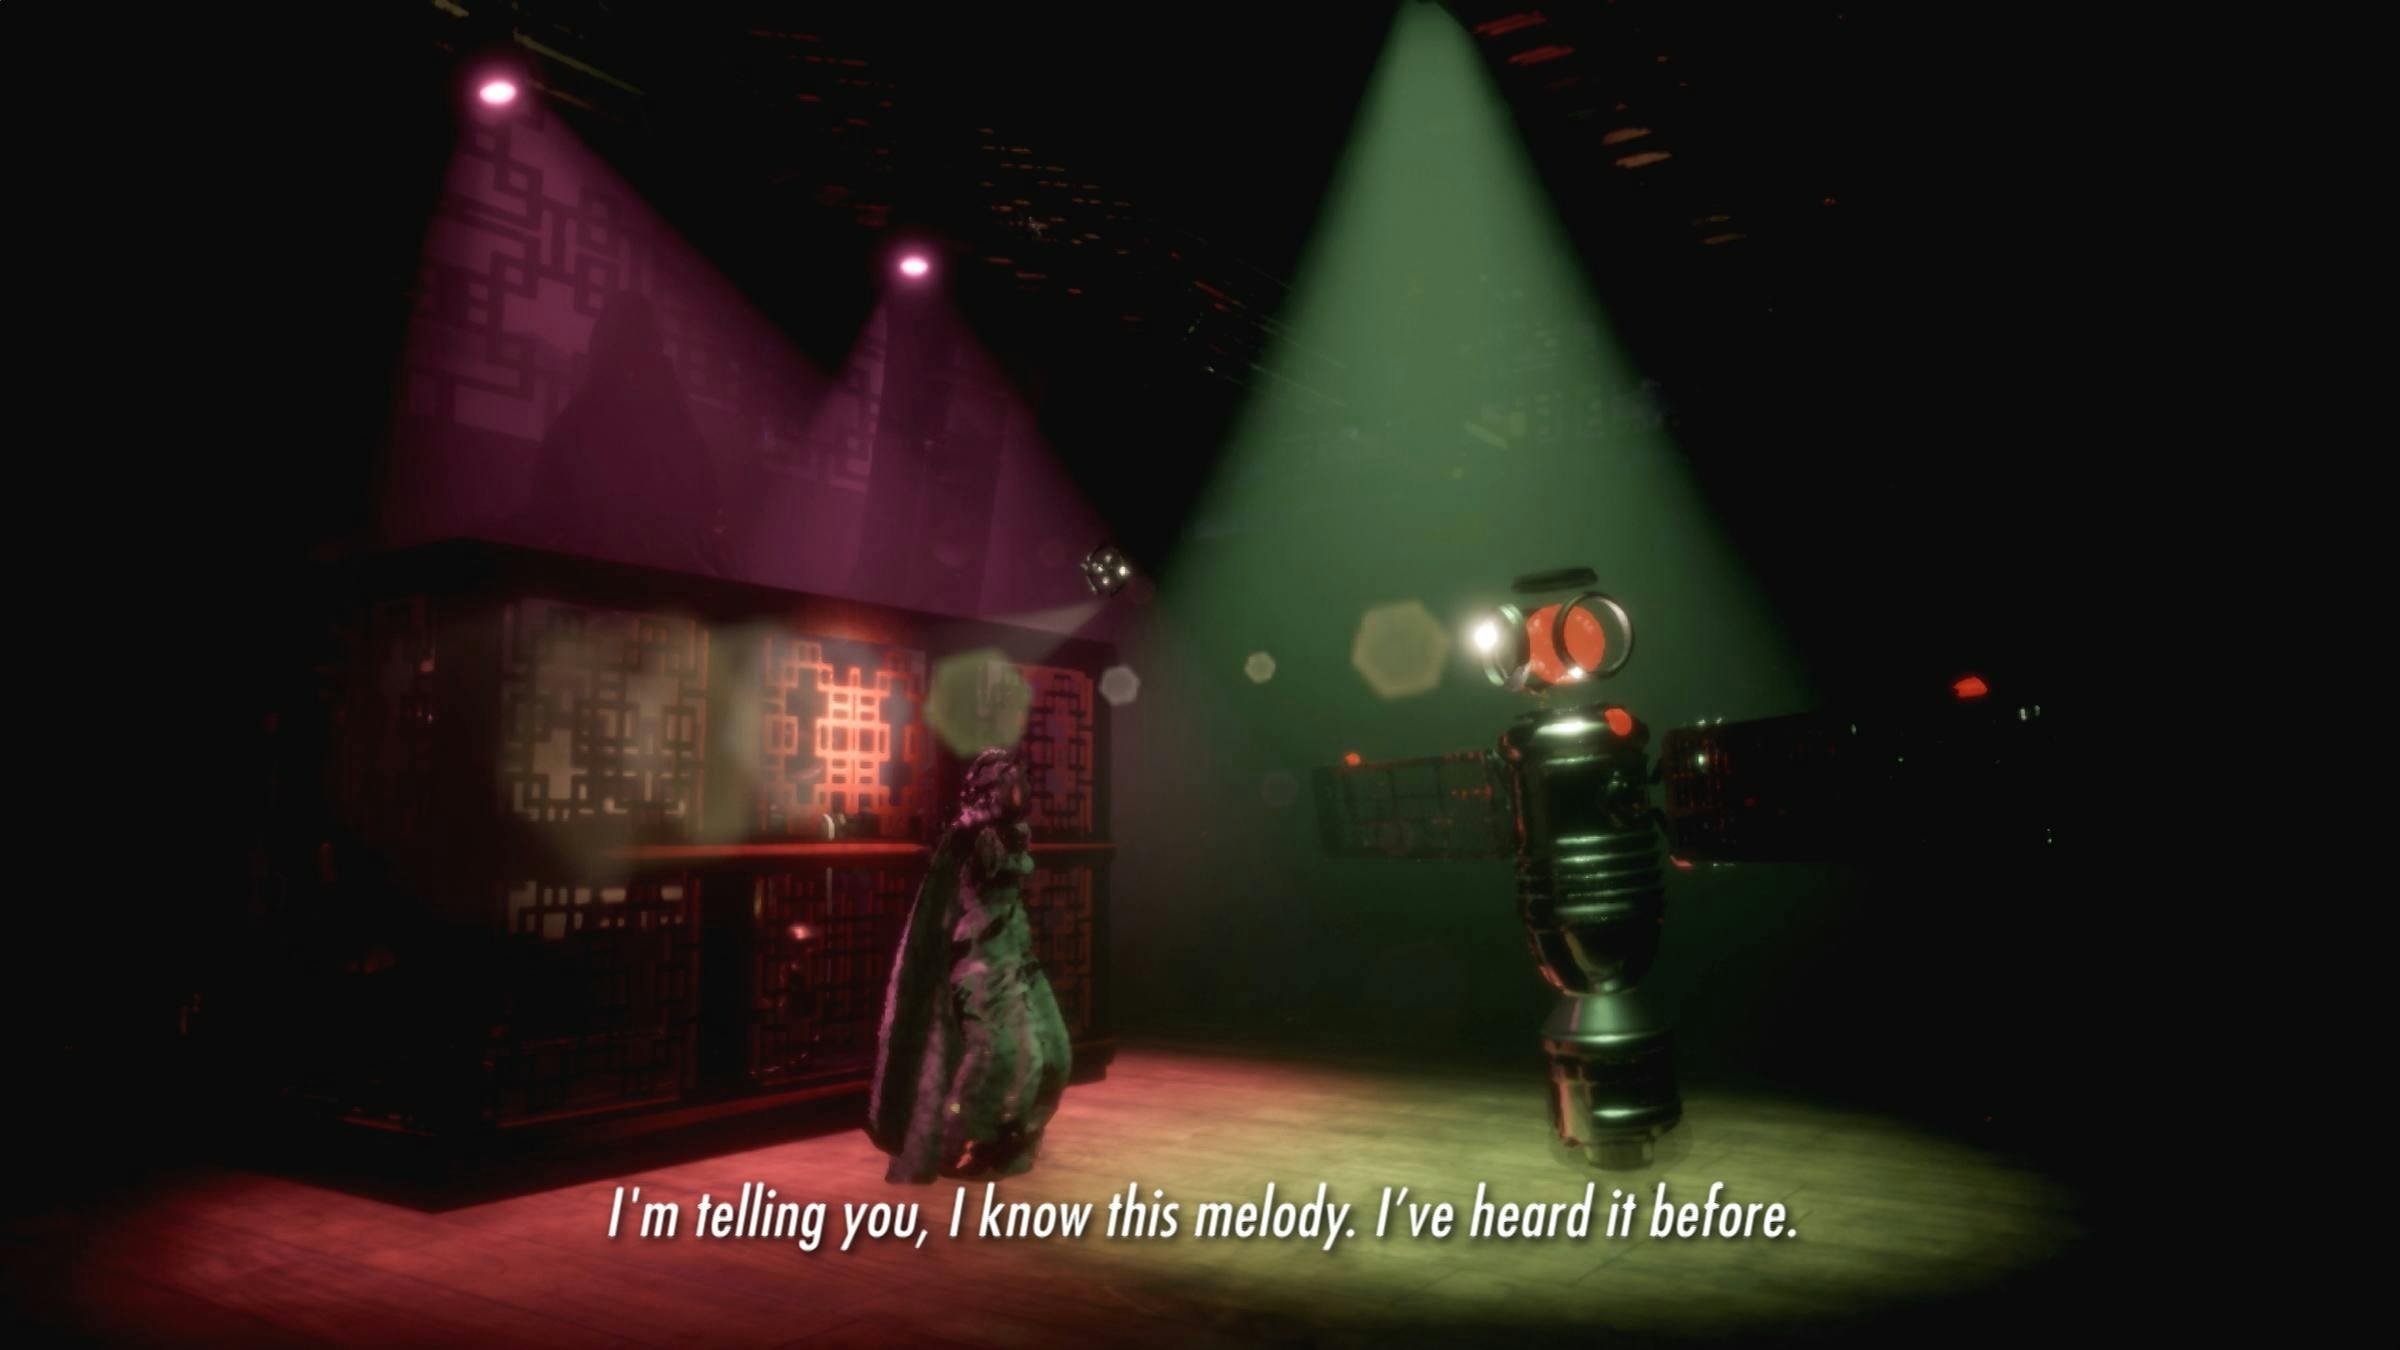 Image of a satellite floating beside a figure in a room lit by pink and green light. The words 'I'm telling you, I know this melody. I've heard it before.' are superimposed on top.